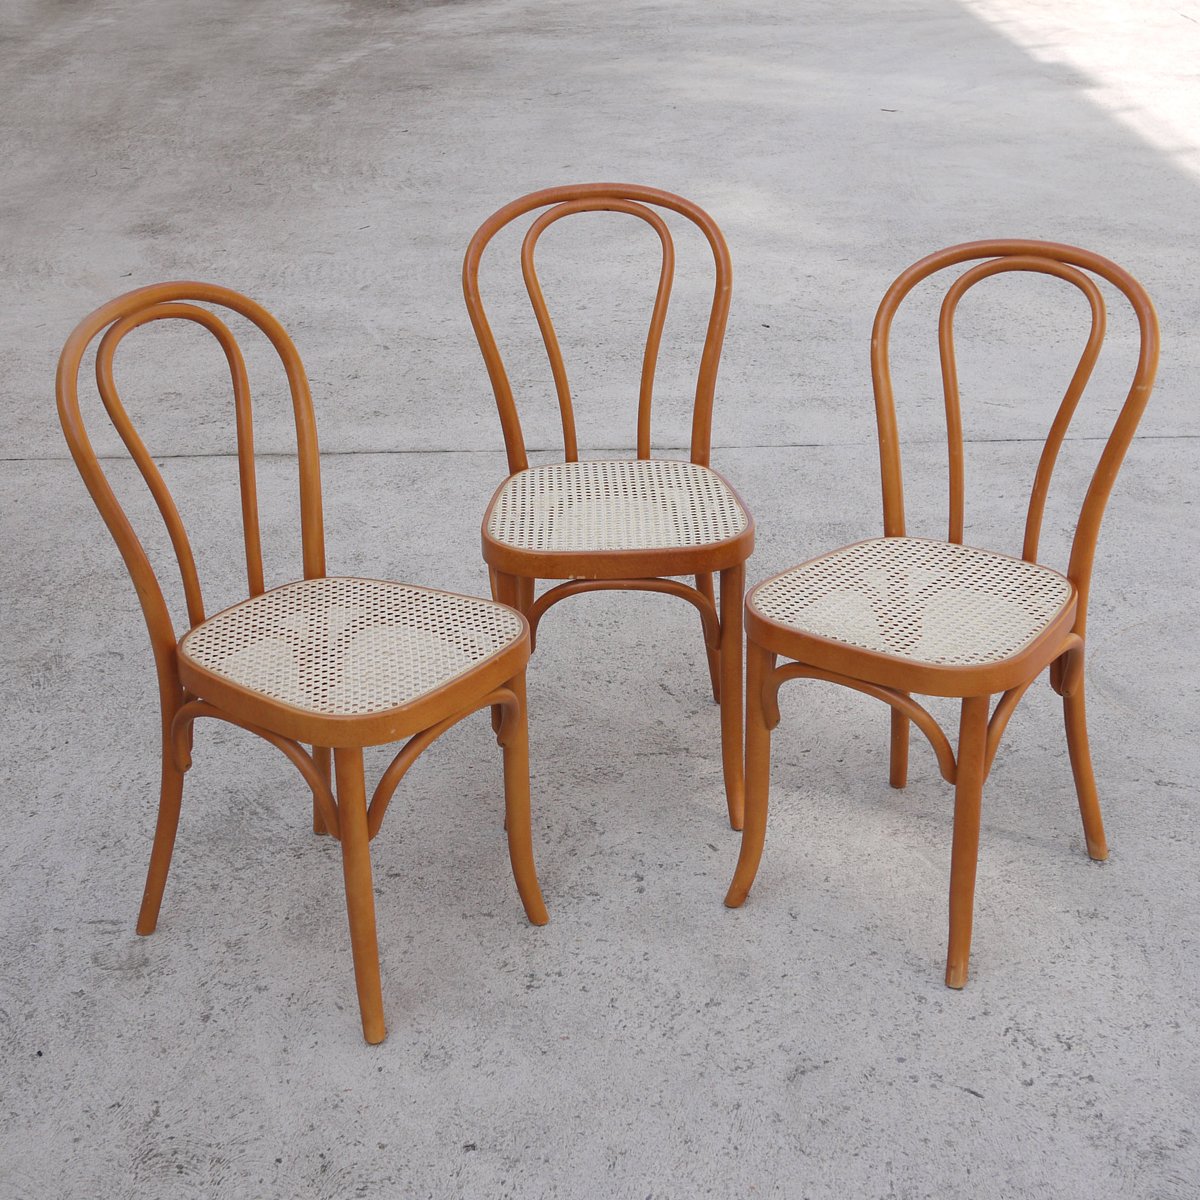 Vintage Bentwood Rattan Dining Chairs, Set of 3 for sale at Pamono